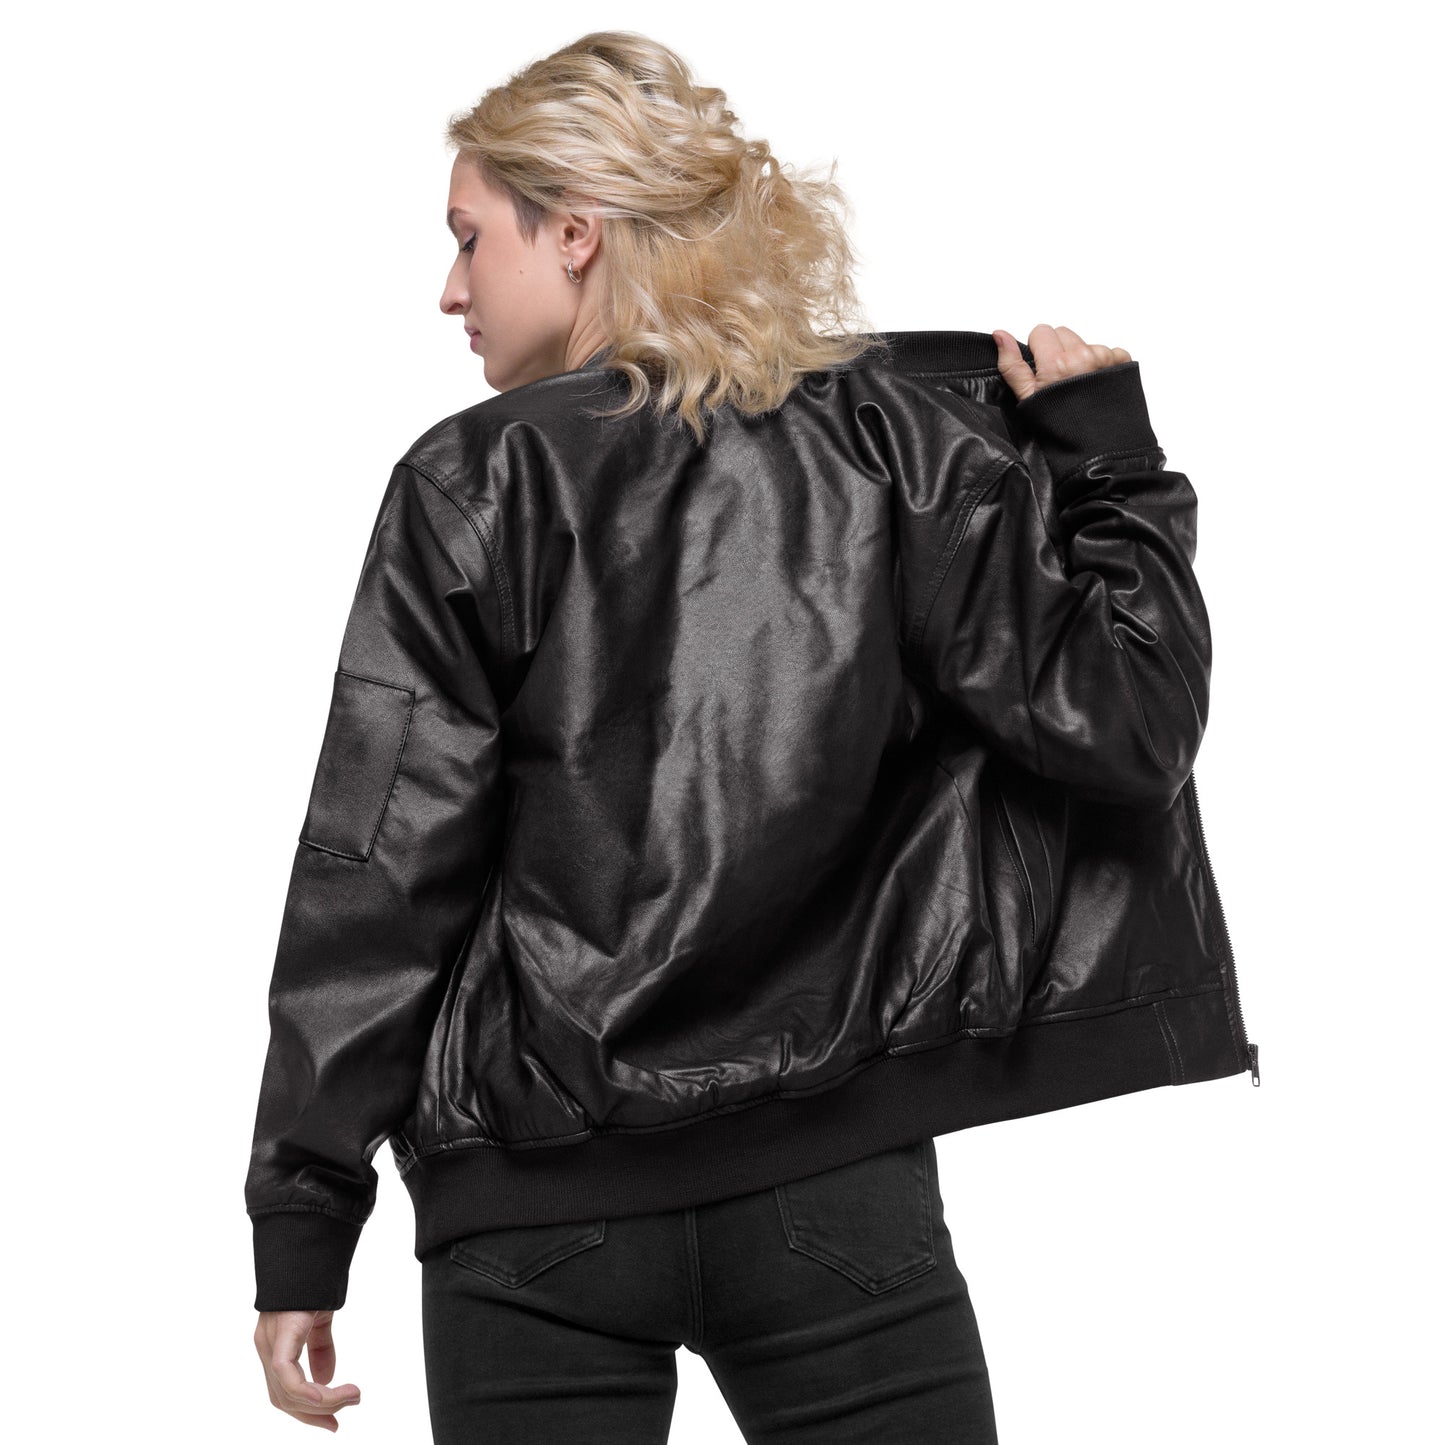 Leather Bomber Jacket - Proud to be a shortgirl